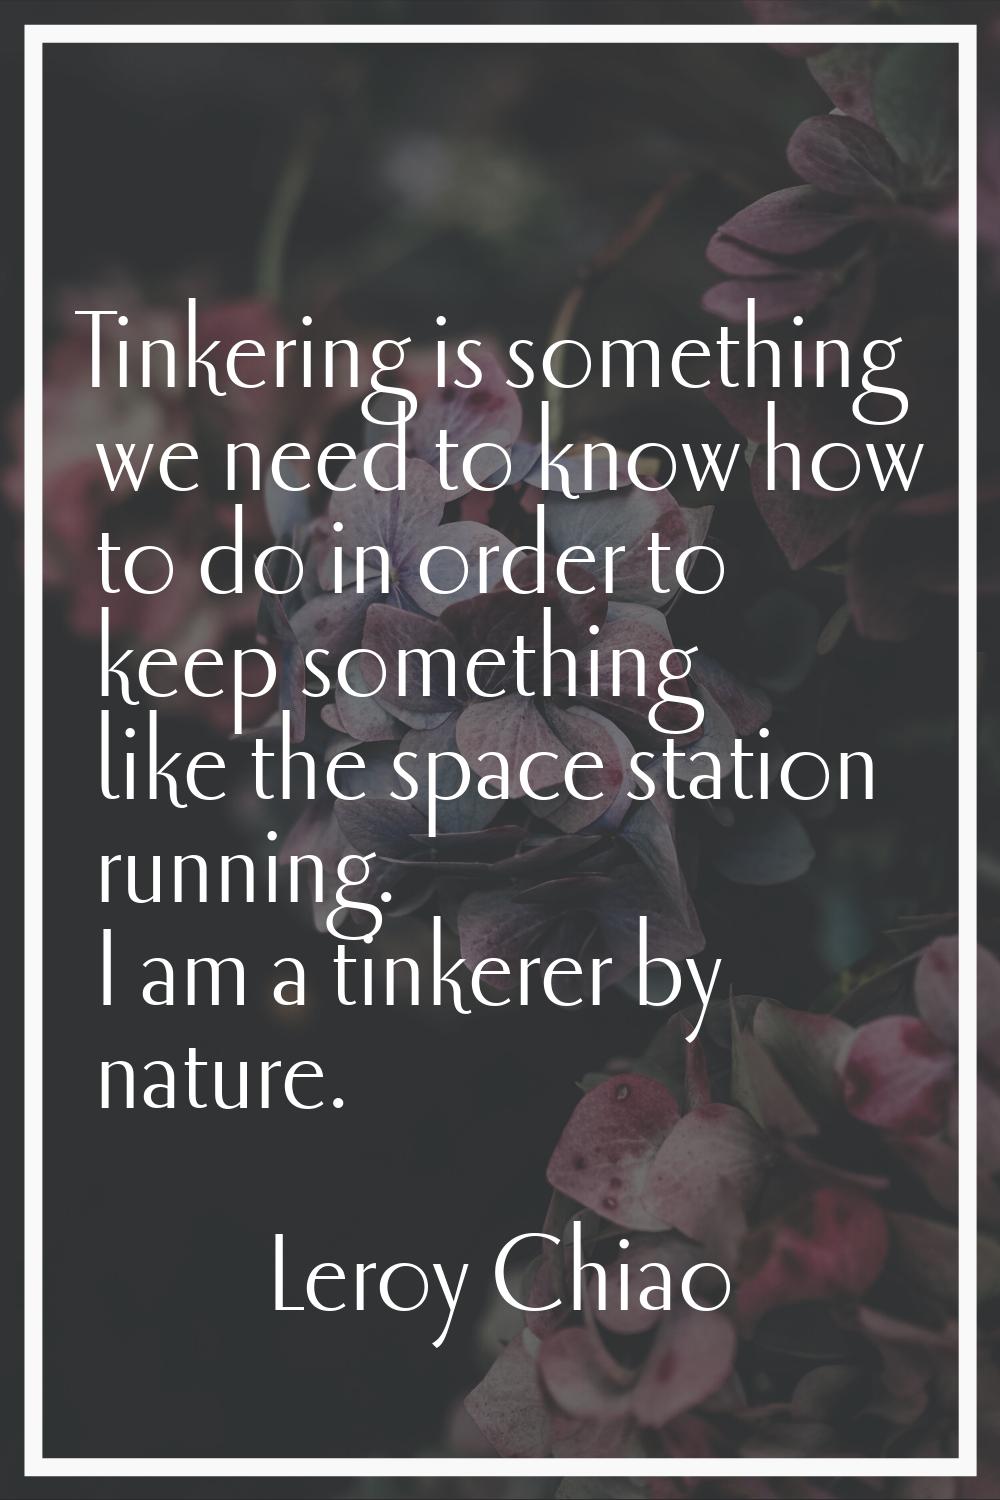 Tinkering is something we need to know how to do in order to keep something like the space station 